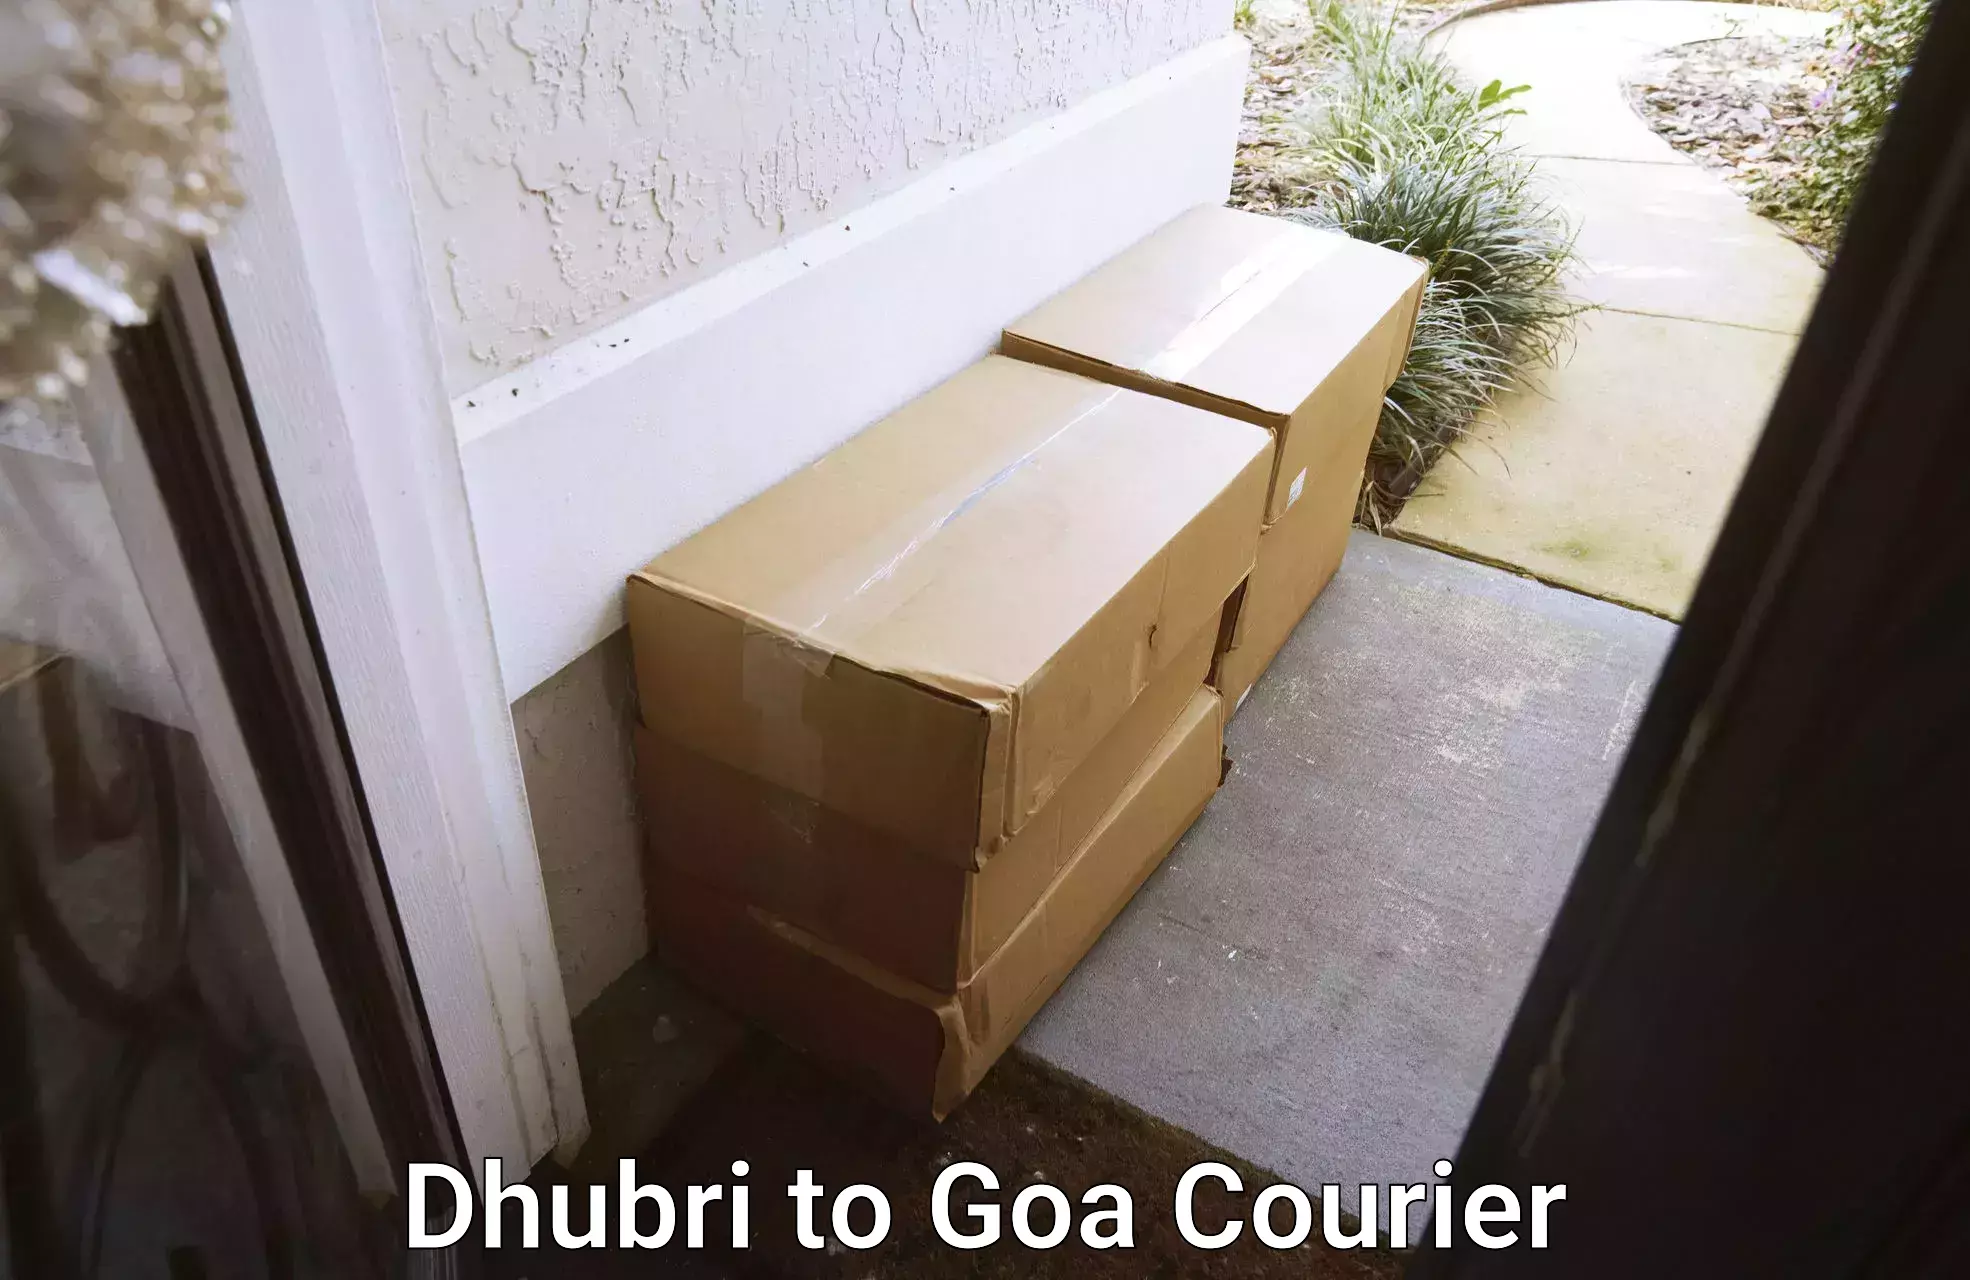 Courier app Dhubri to Goa